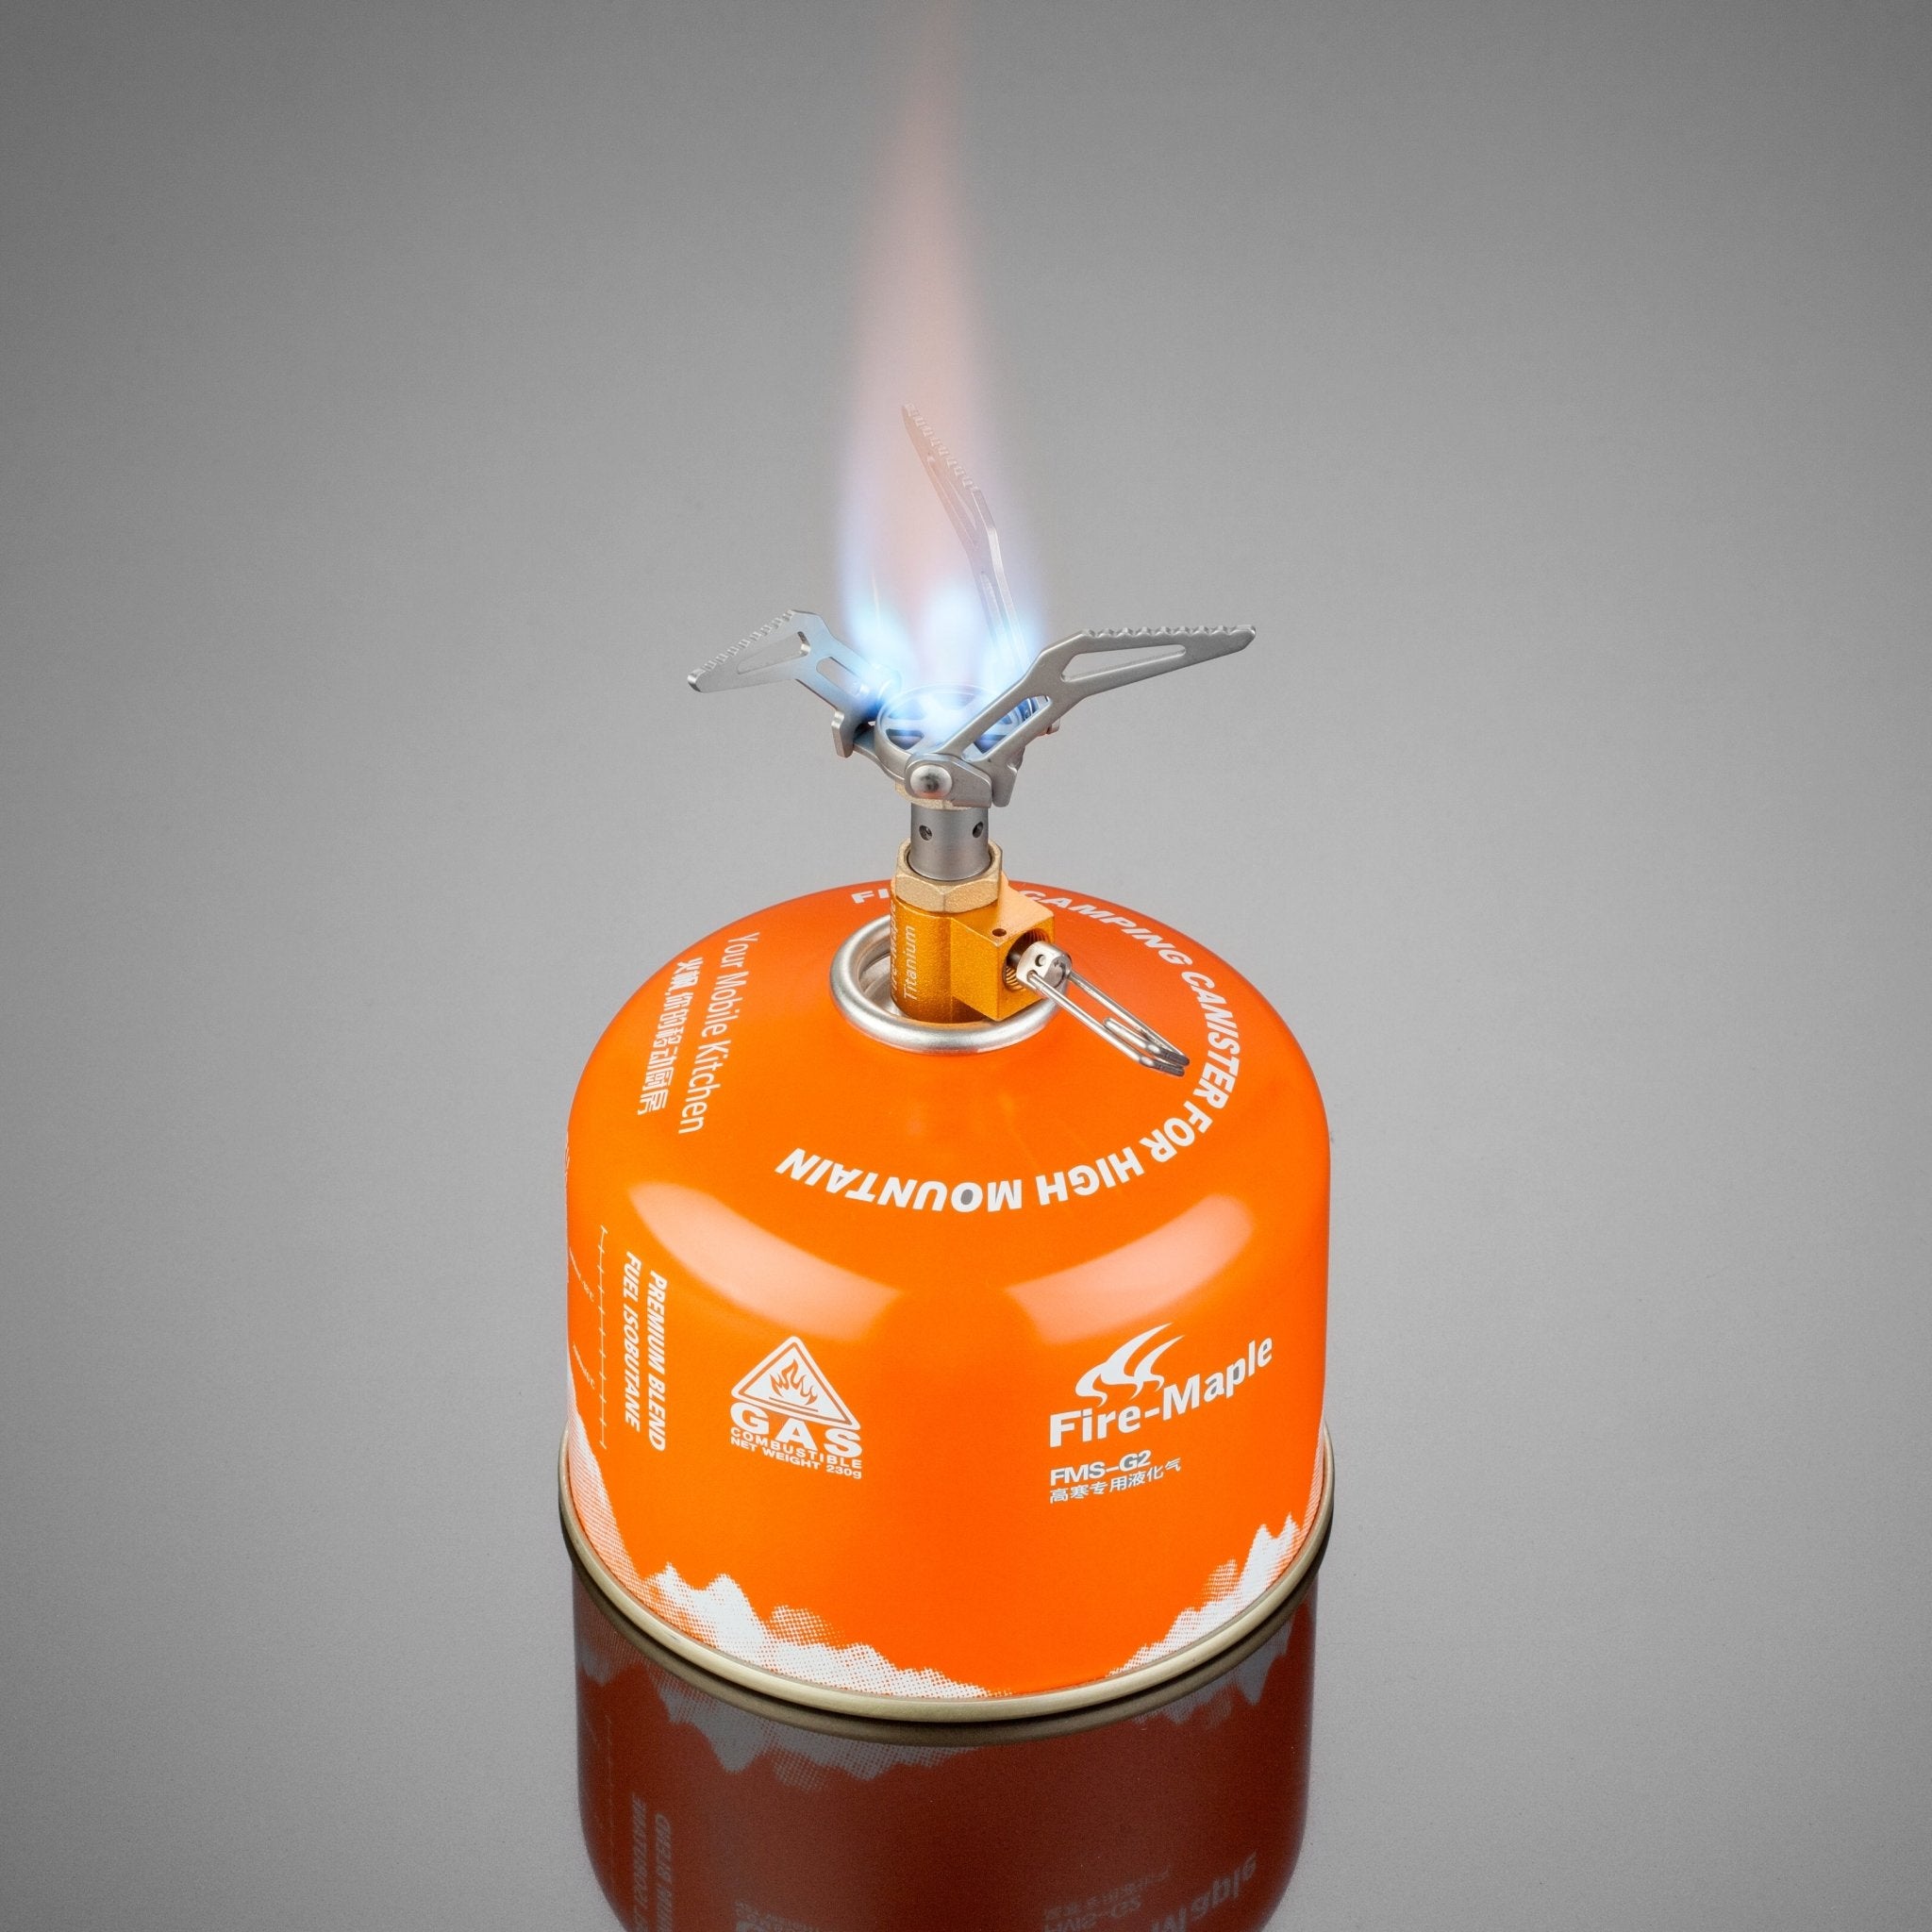 FIRE-MAPLE SPARK WIND-RESISTANT REMOTE CANISTER STOVE